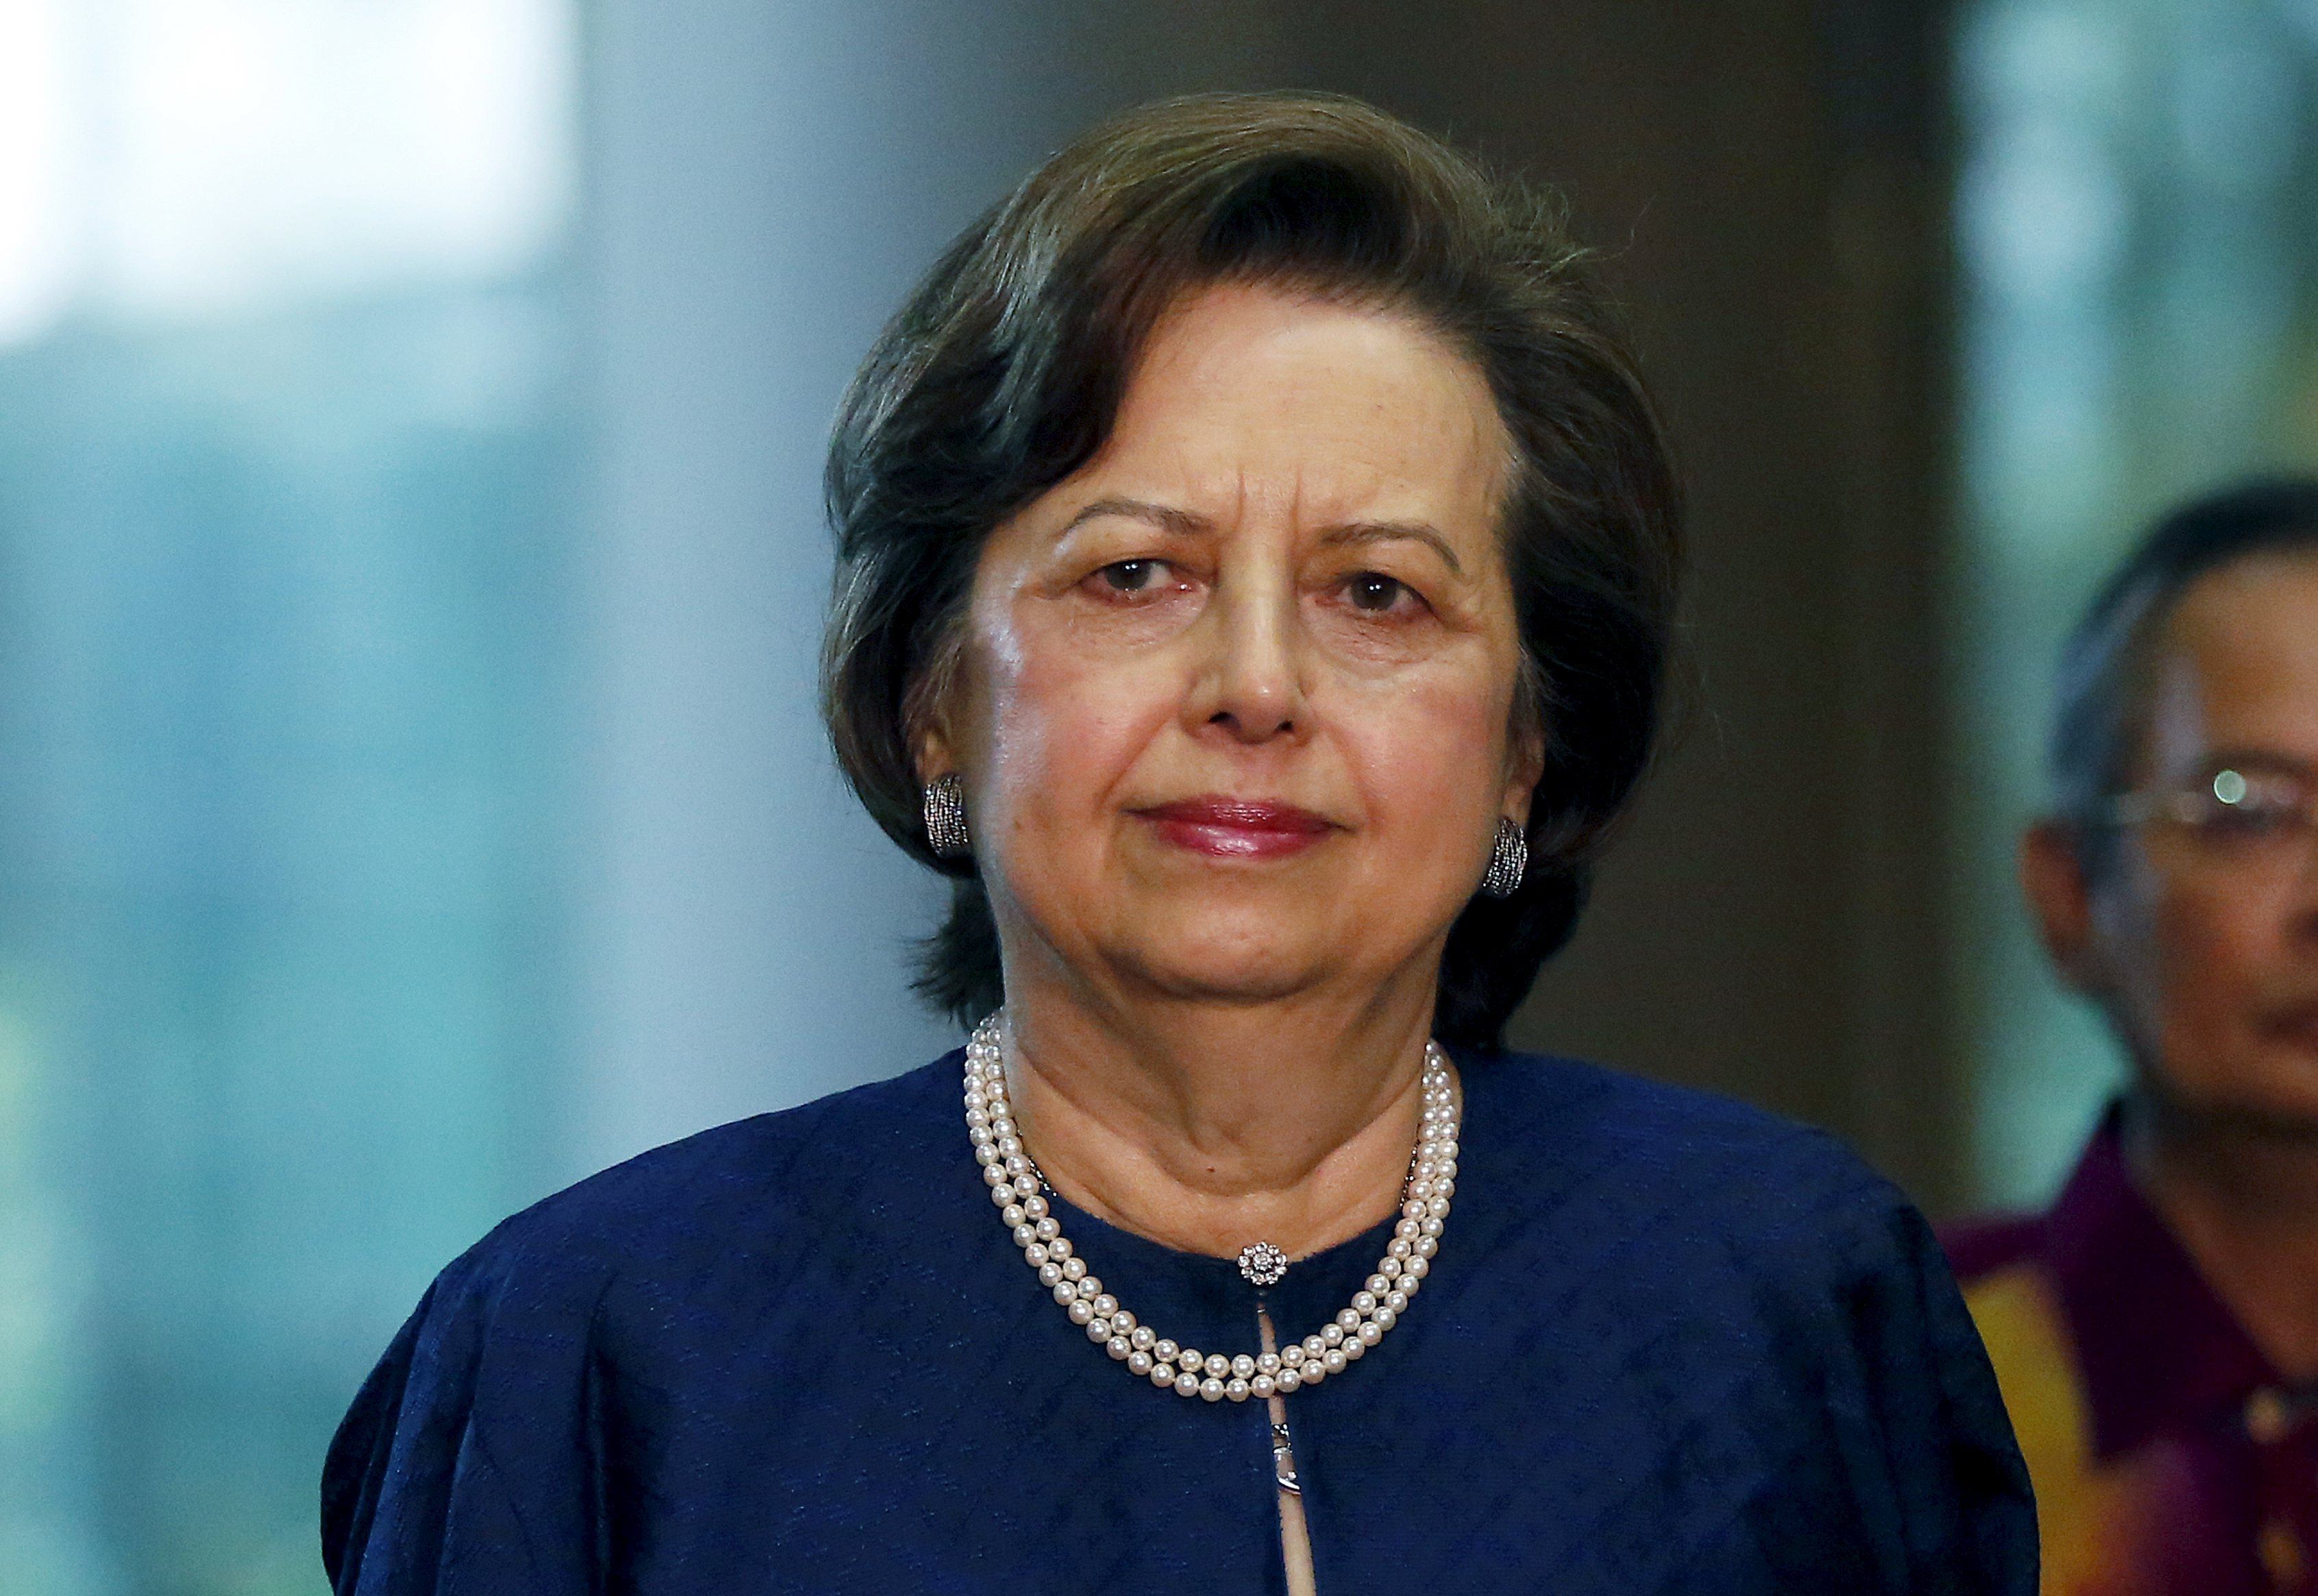 Former Malaysia Bank Negara governor Zeti Akhtar Aziz has appeared in court for the corruption trial of ex-Prime Minister Najib Razak. Photo: Reuters